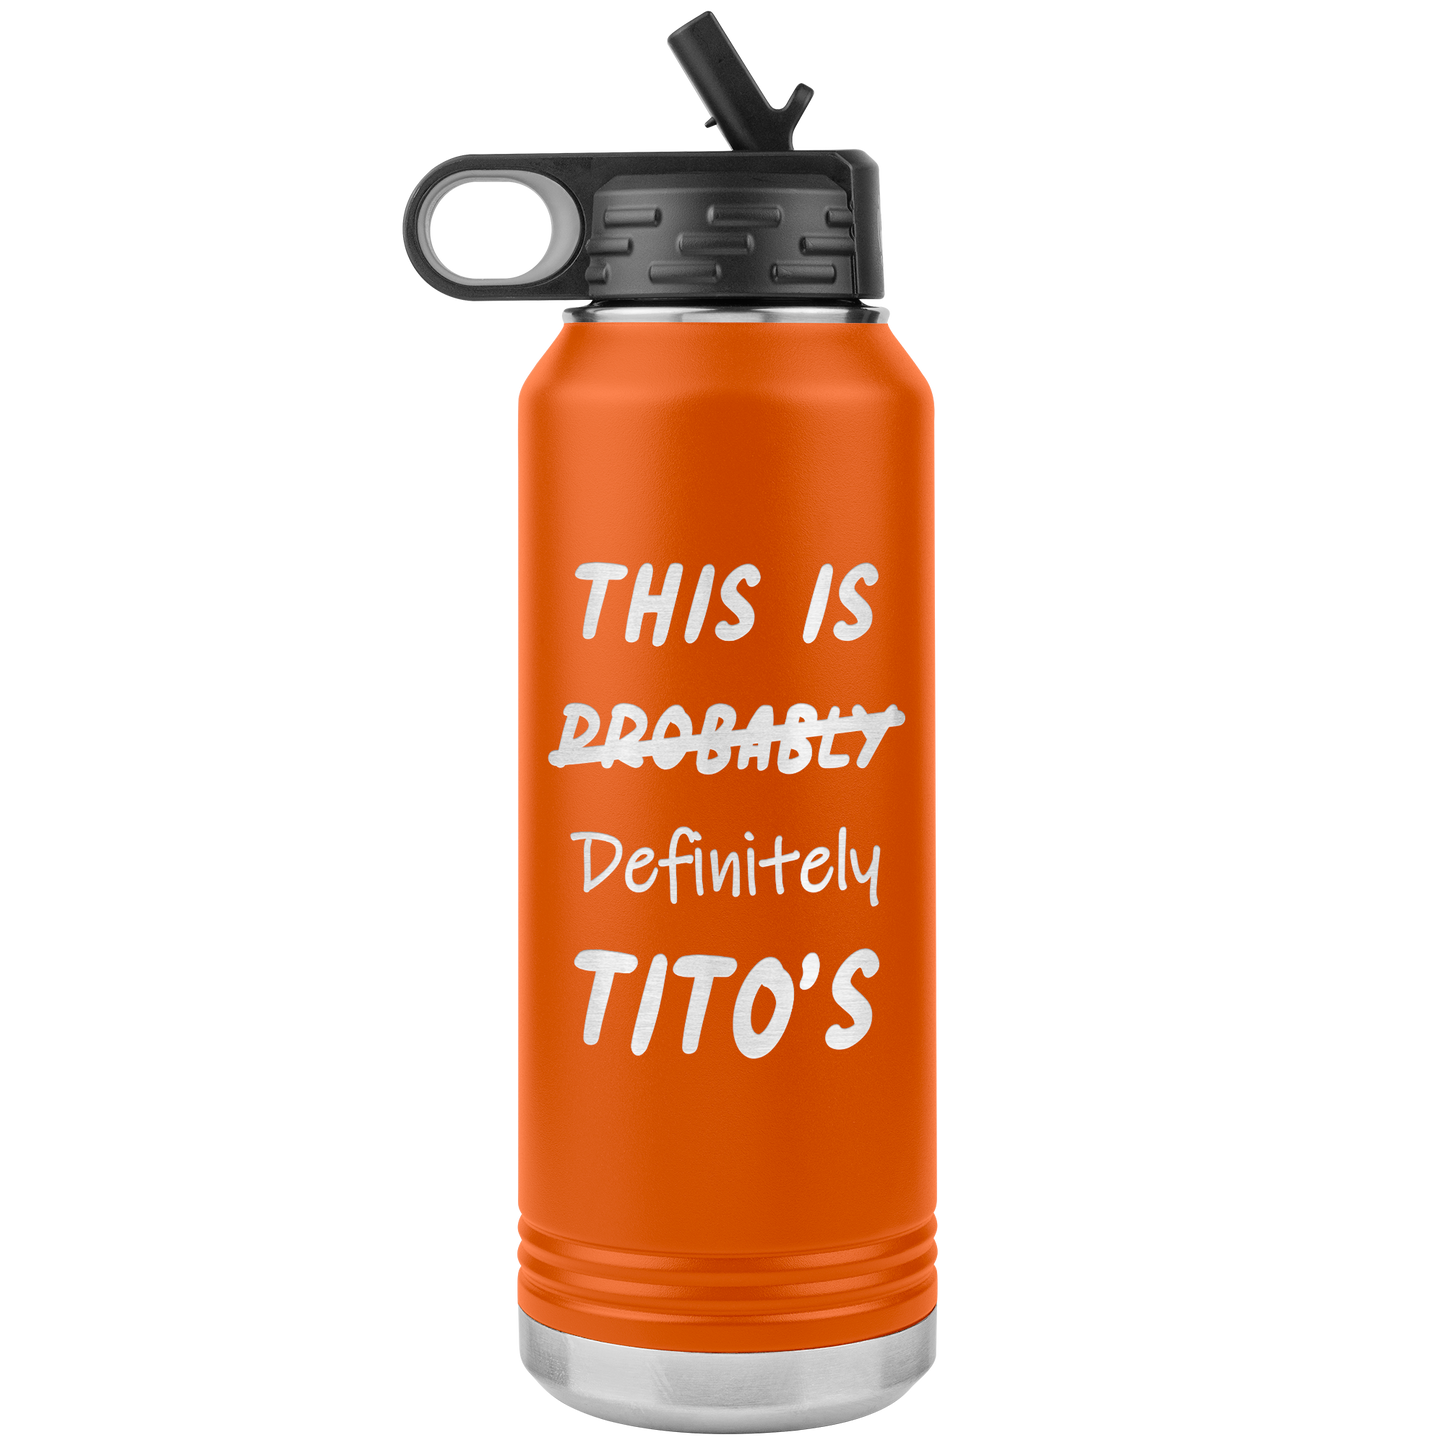 This Is Probably Titos Water Bottle Tumbler